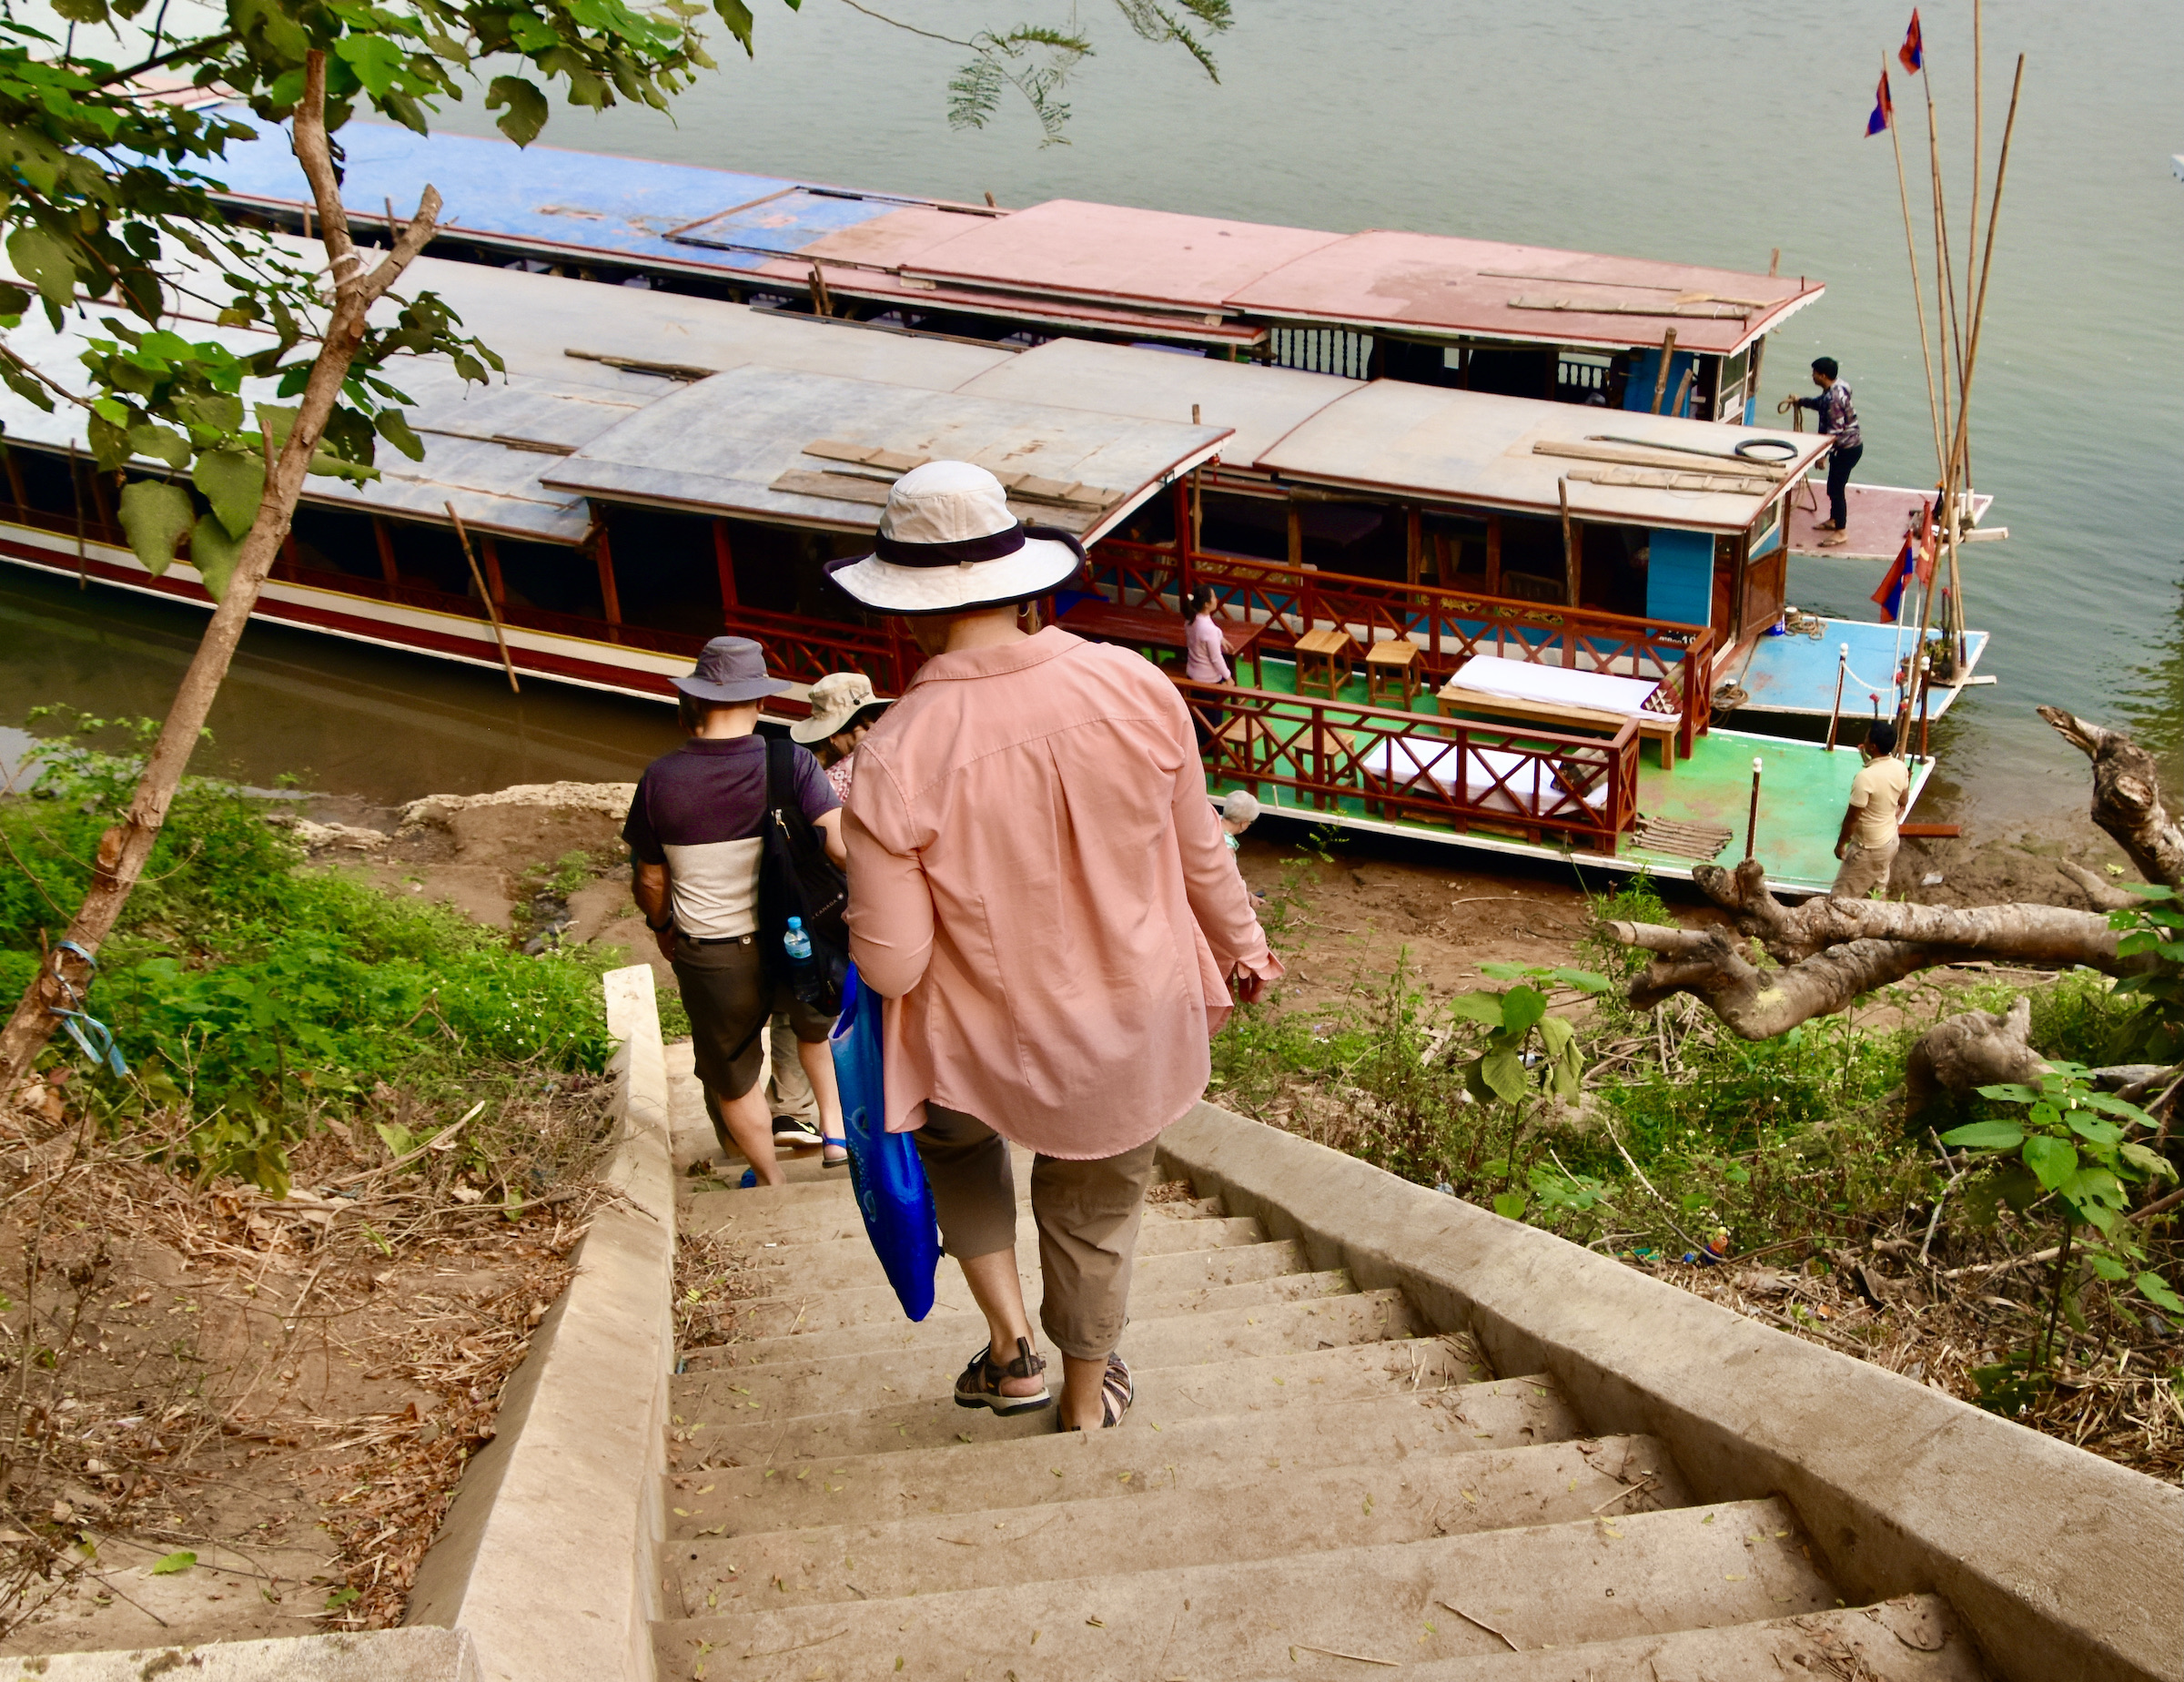 Heading for the Boat to begin the Mekong River cruise